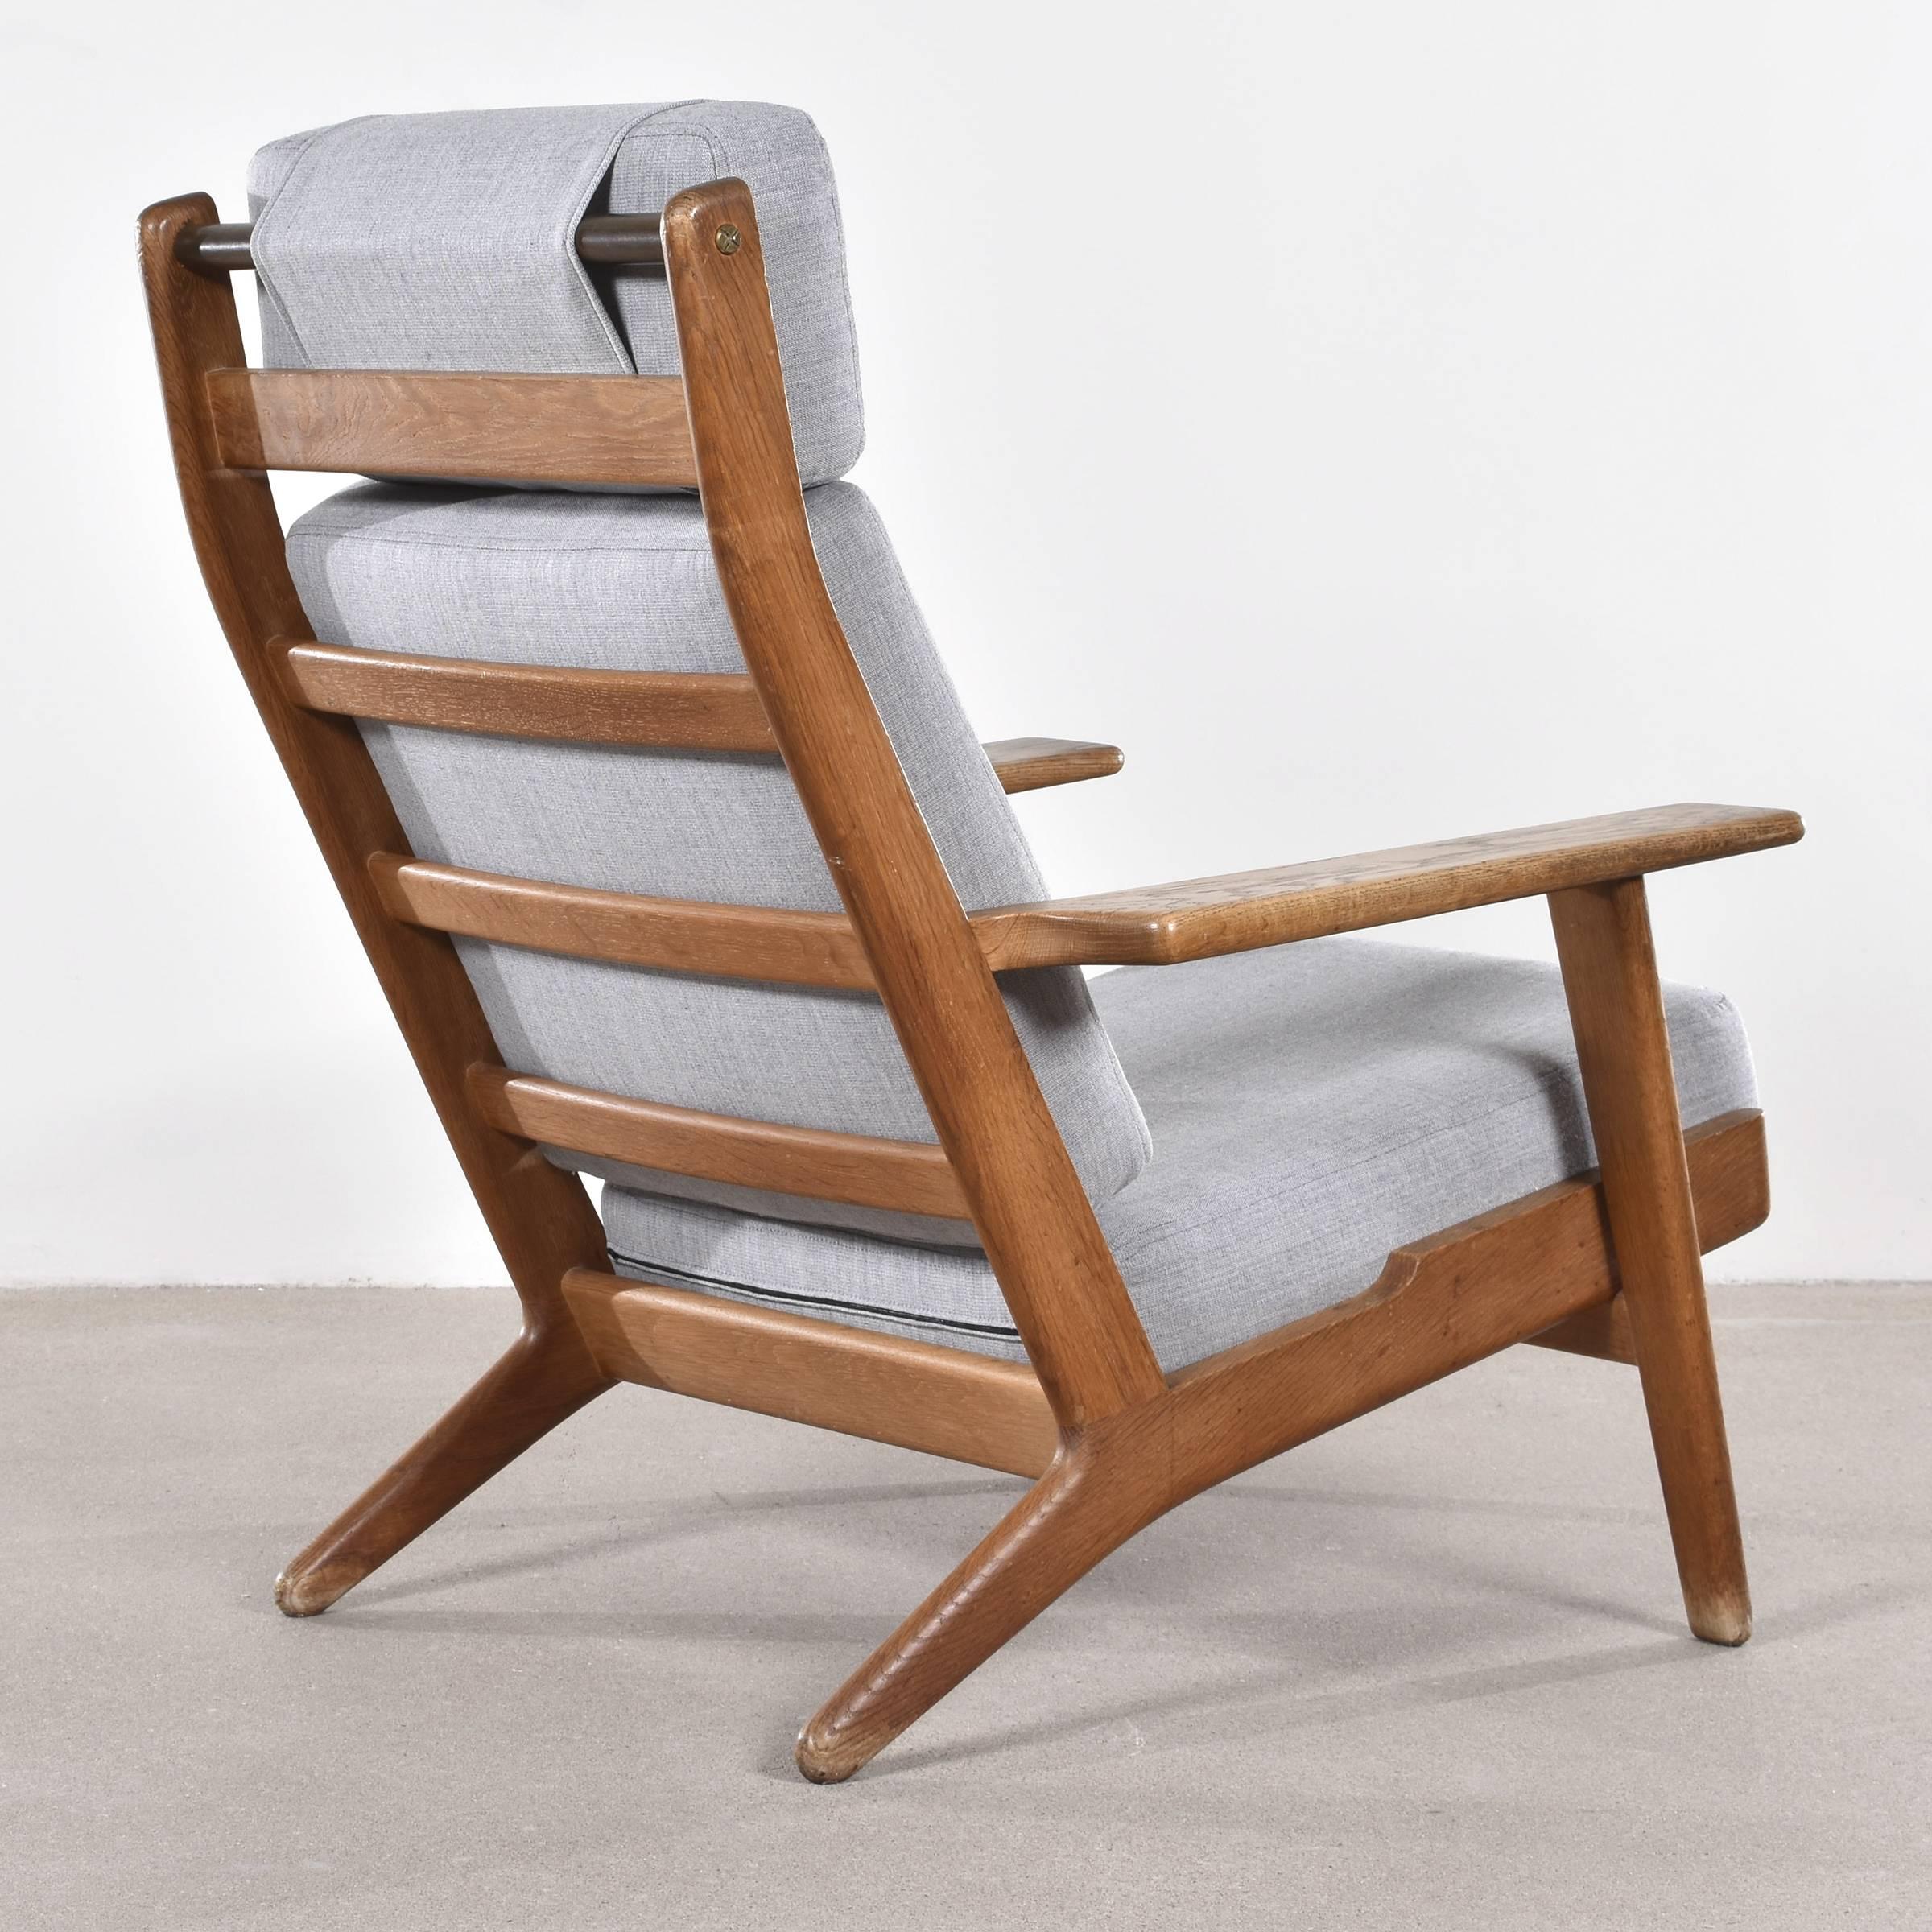 Hans Wegner GE290 lounge high back armchair. Oak frame with new upholstered cushions. All in good condition.

Free shipping for European destinations!

We strive for a high level of service and offer: White glove shipping, parcel shipping and